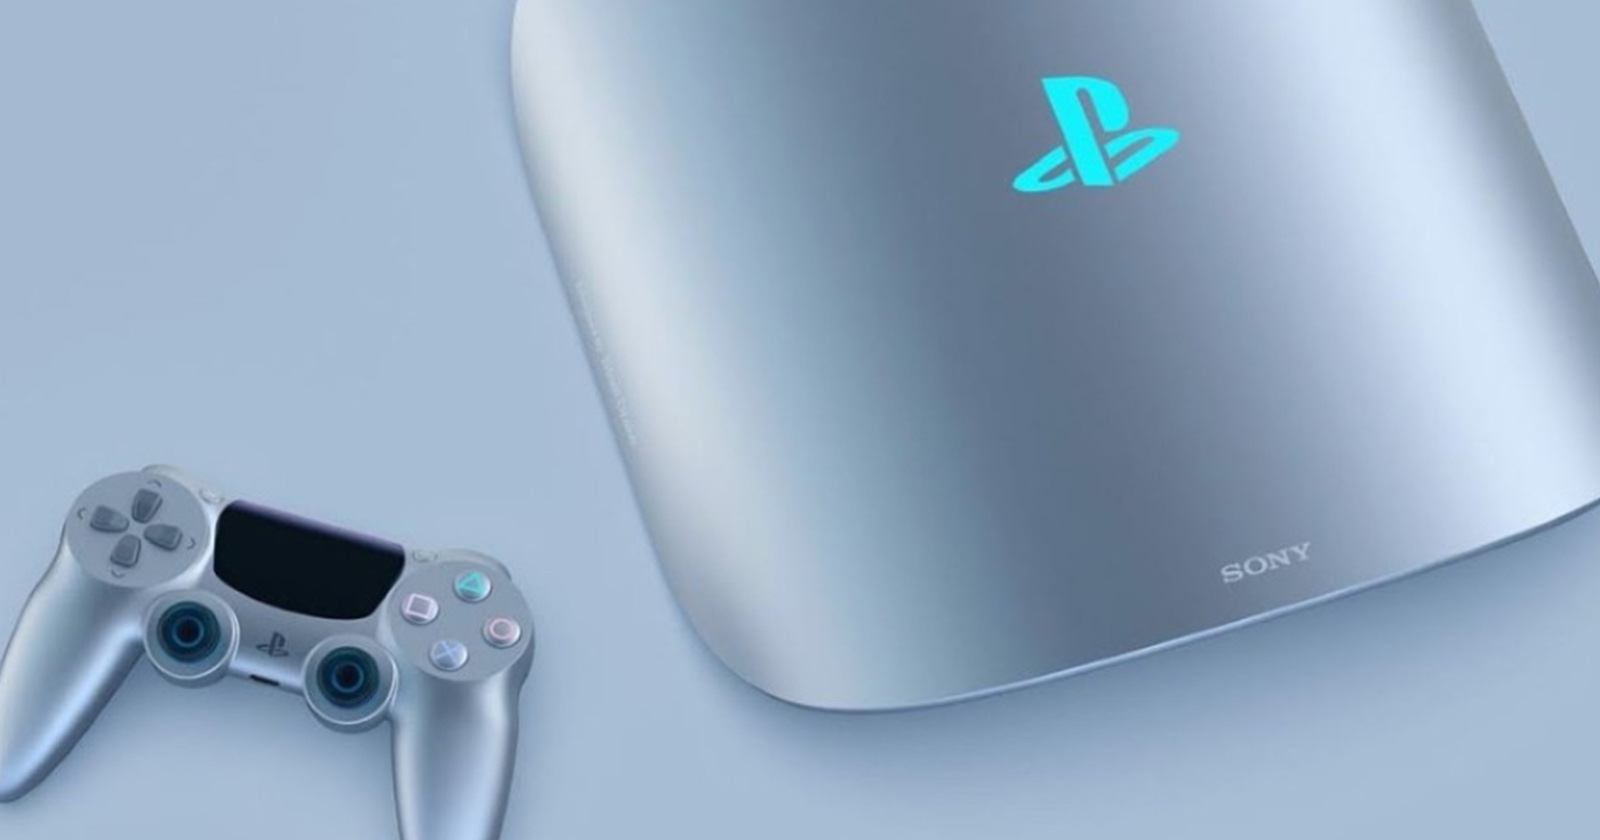 PS5 Pro step from Sony! Coming sooner than expected